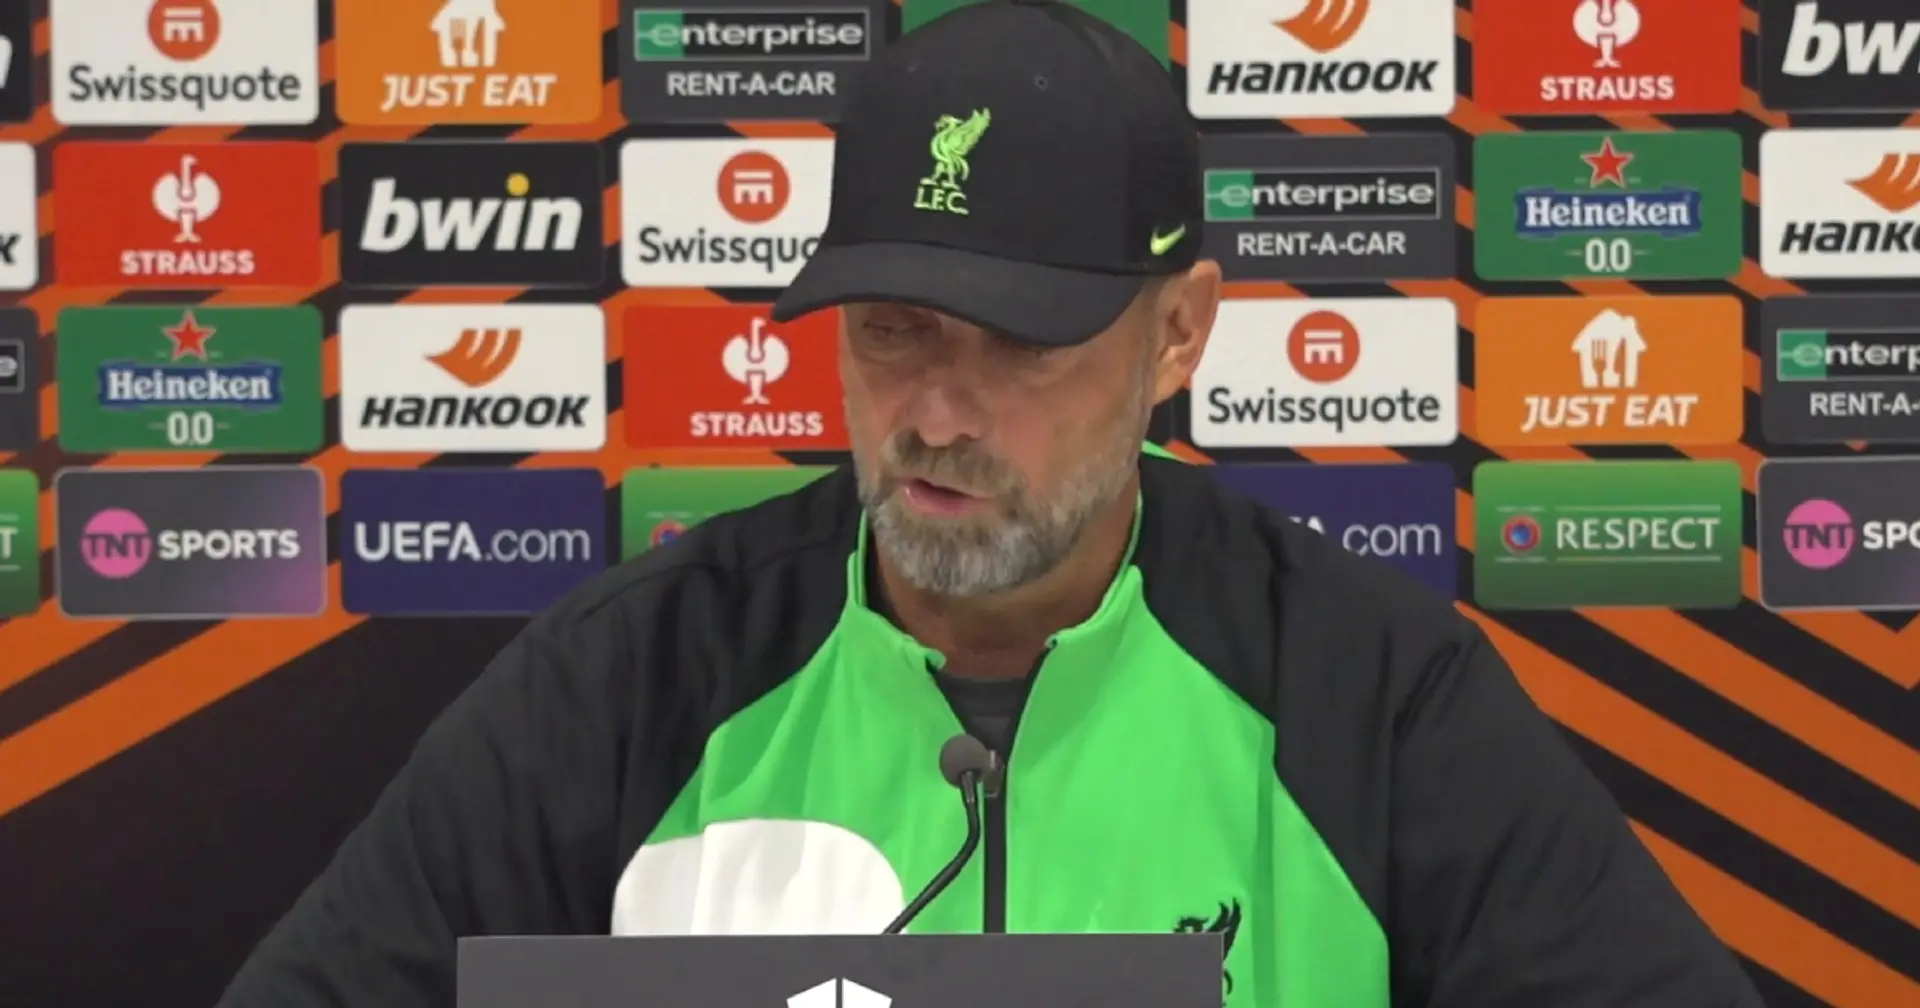 'We lost rhythm slightly': Klopp explains what he didn't like about Union performance